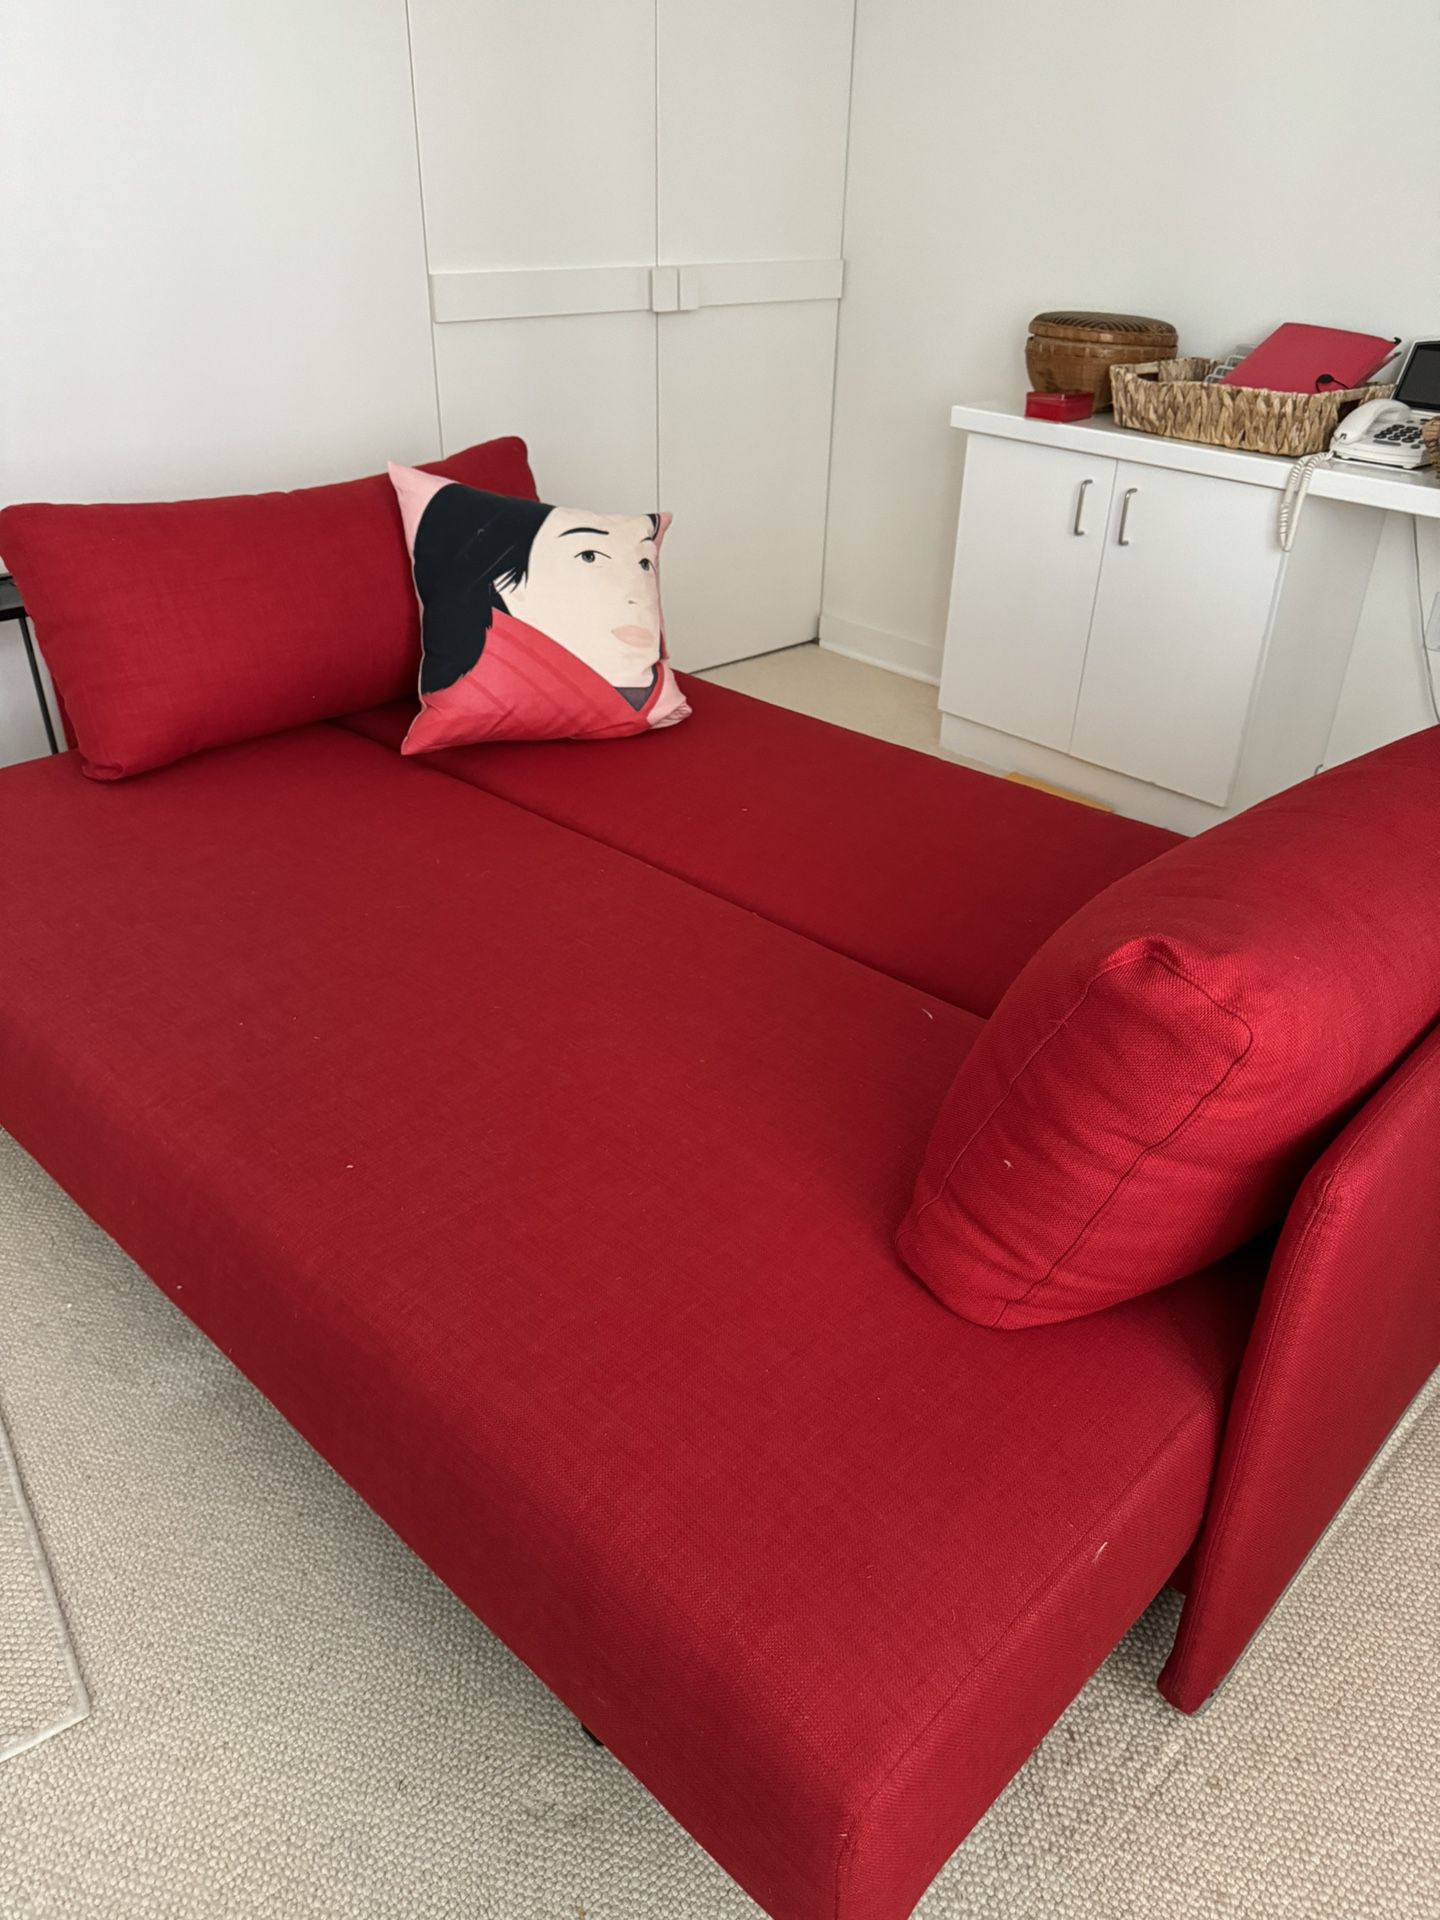 Gorgeous Red CB2 Couch / Bed